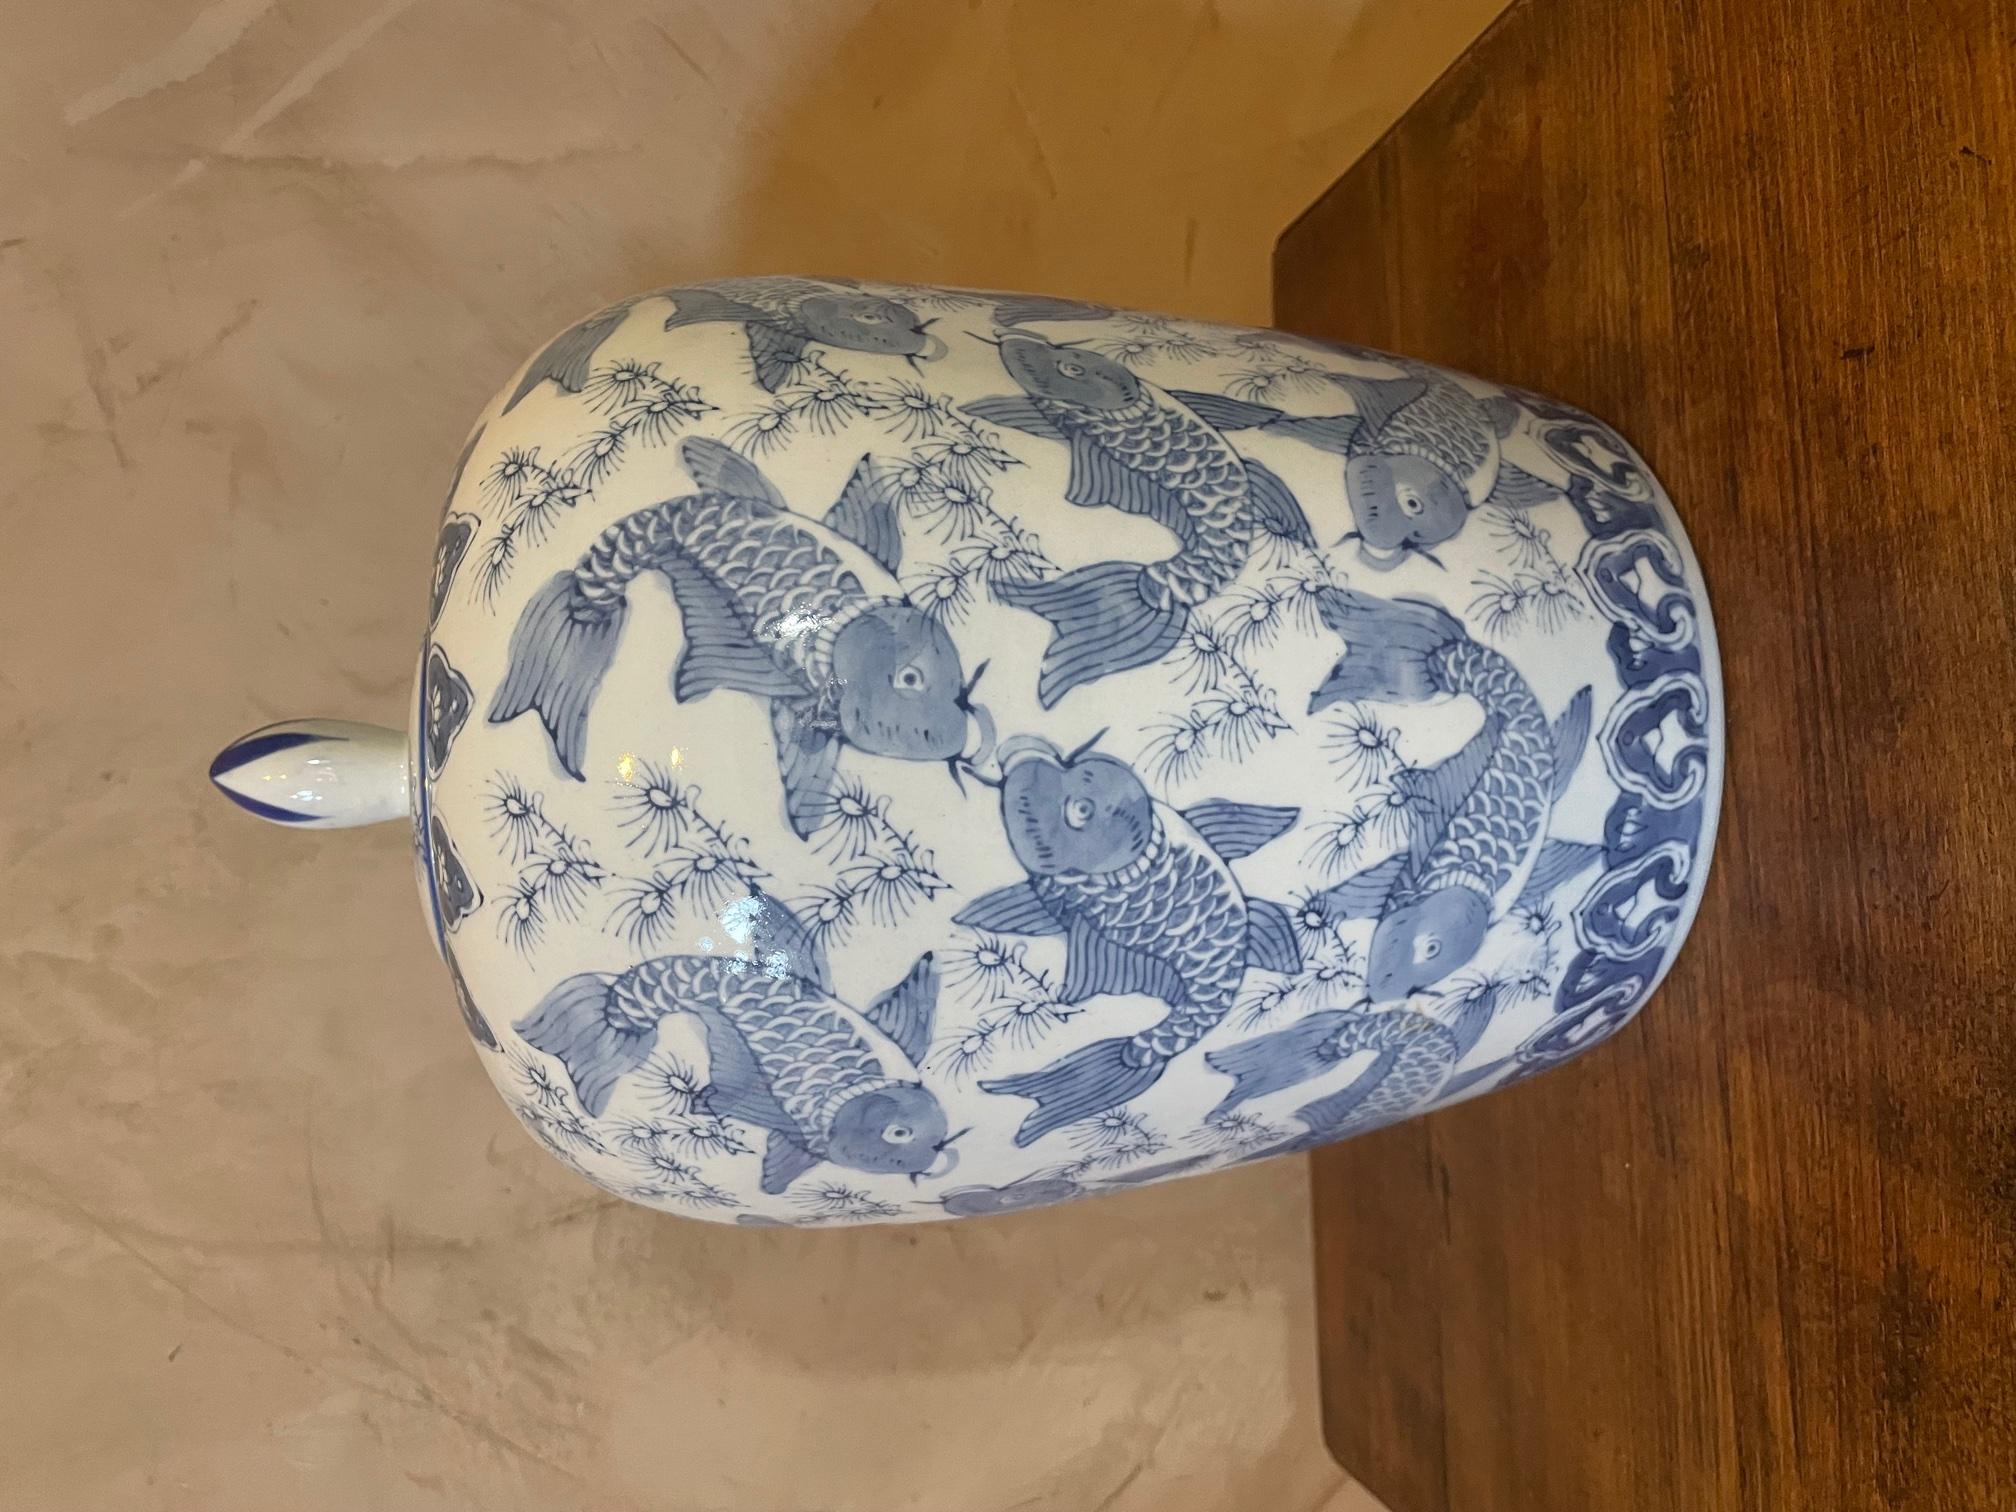 Very nice 20th century Chinese white and blue ceramic vase from the 1920s. 
Signed 